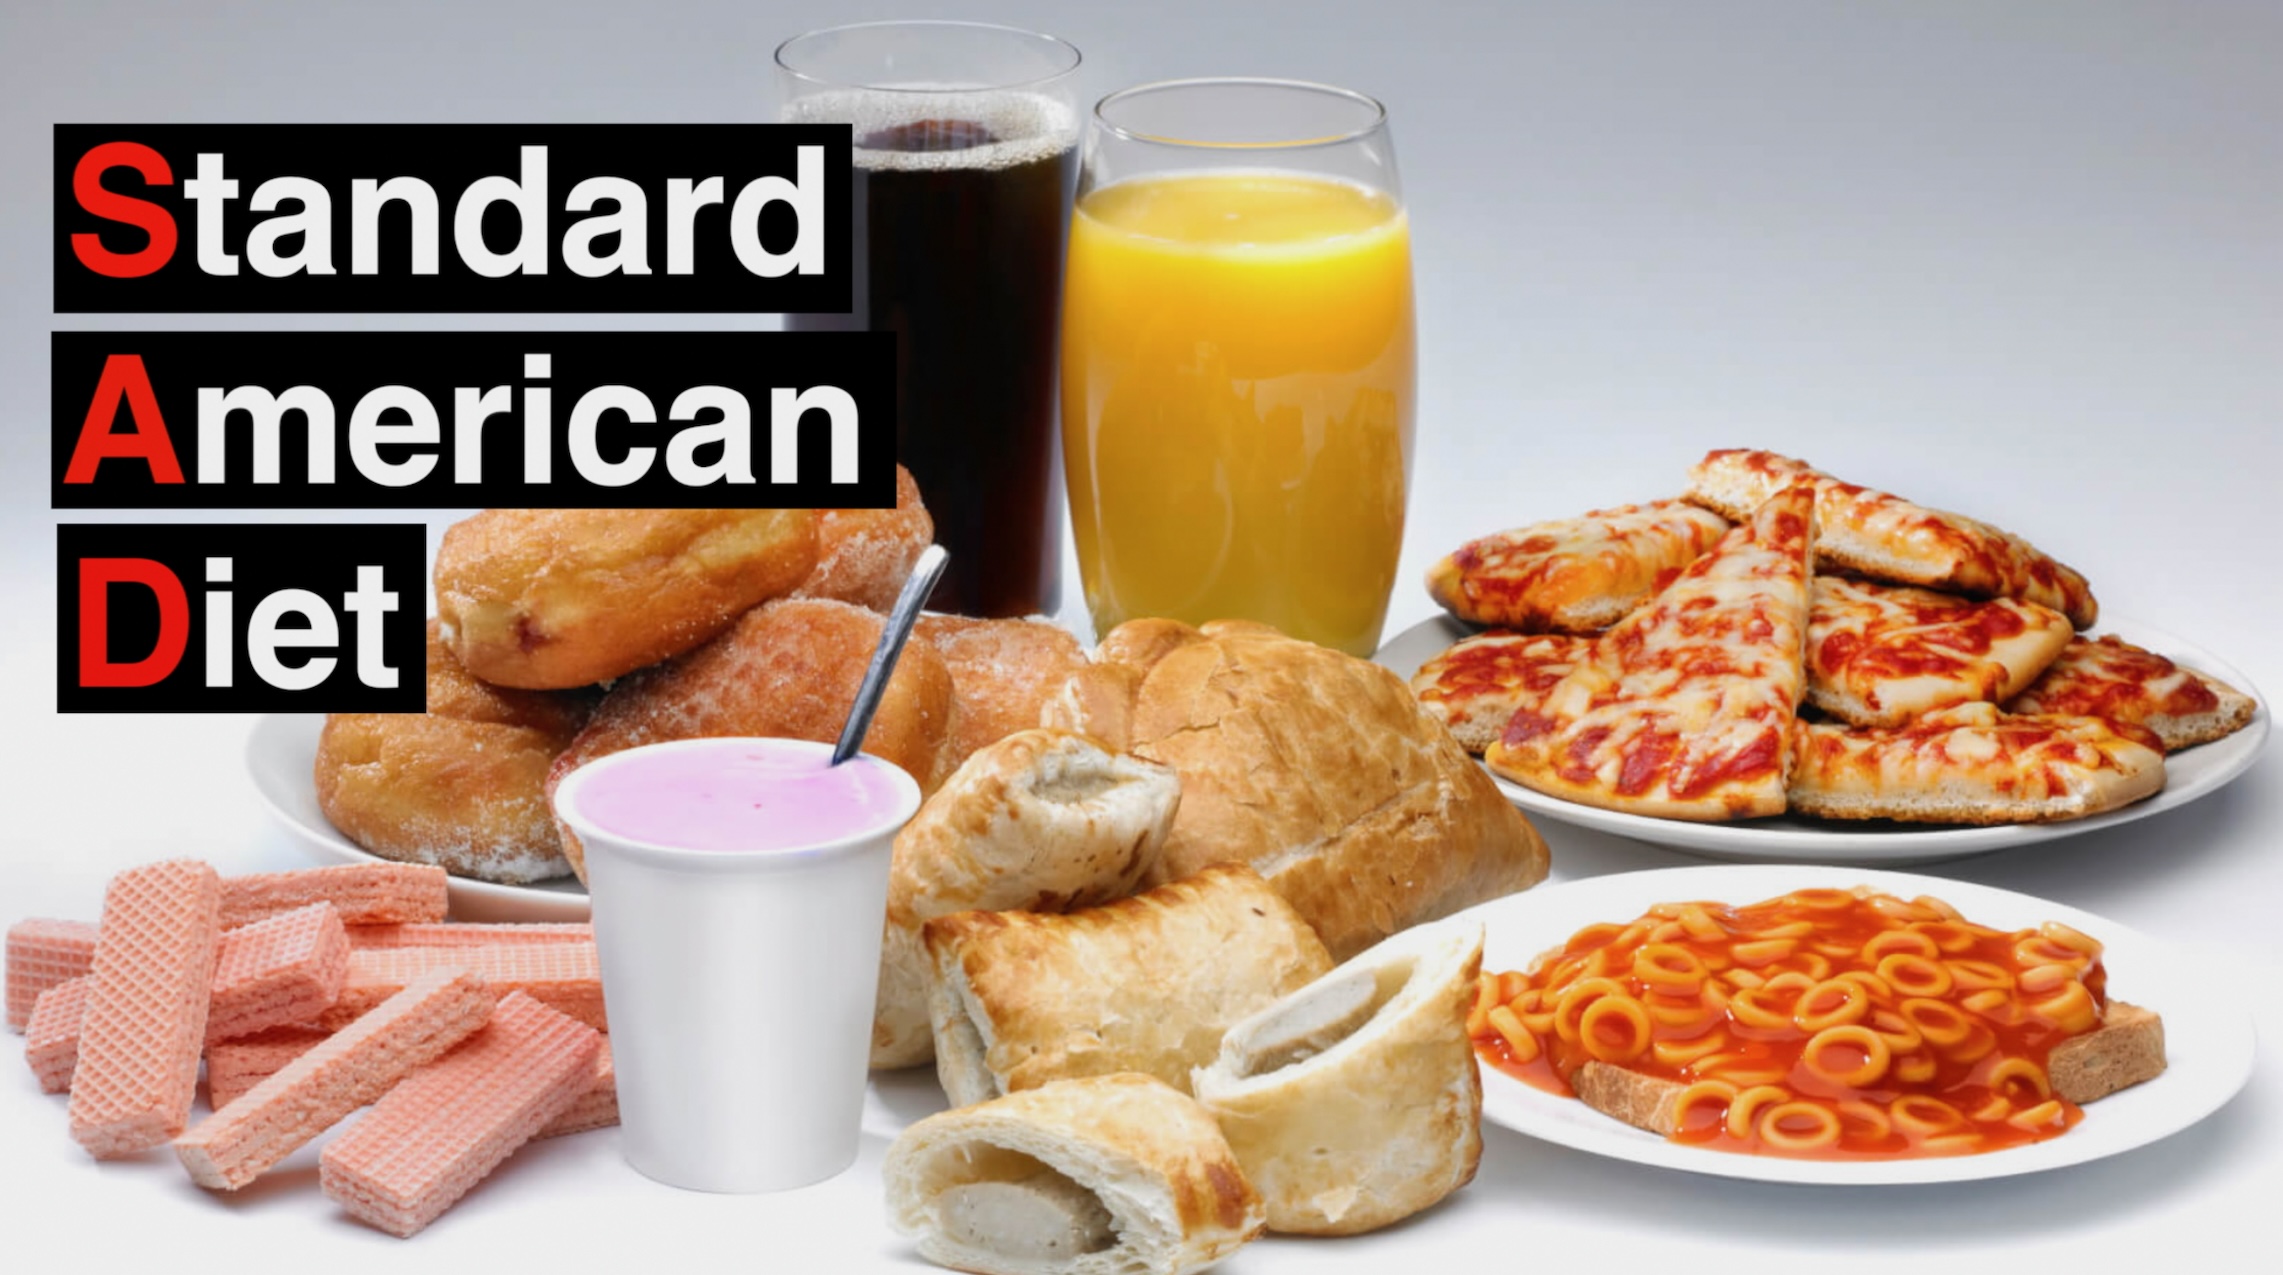 The Standard American Diet is full of ultra-processed foods